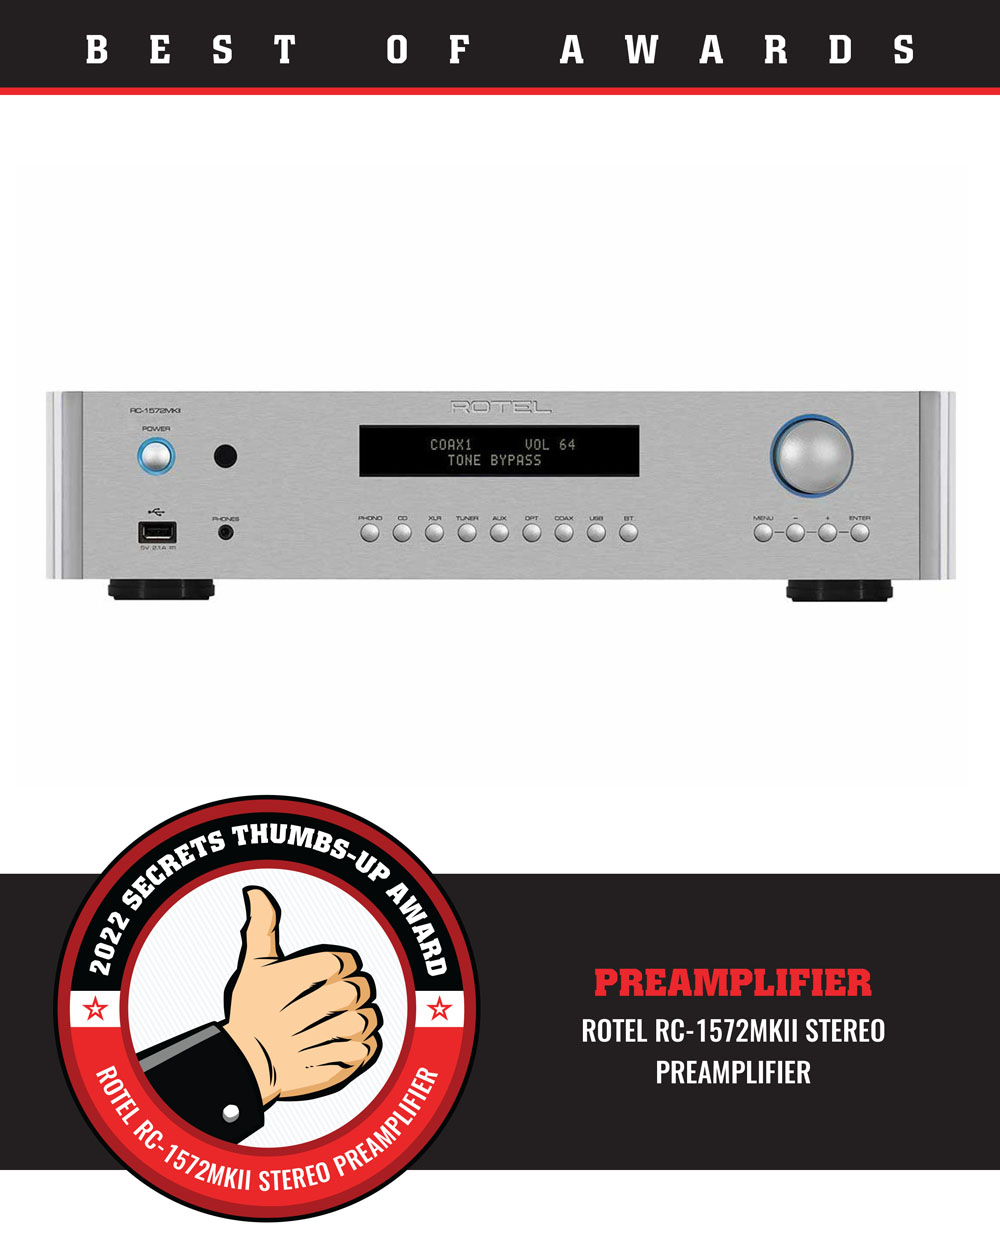 Rotel RC-1572MKII Stereo Preamplifier Best of 2022 Award